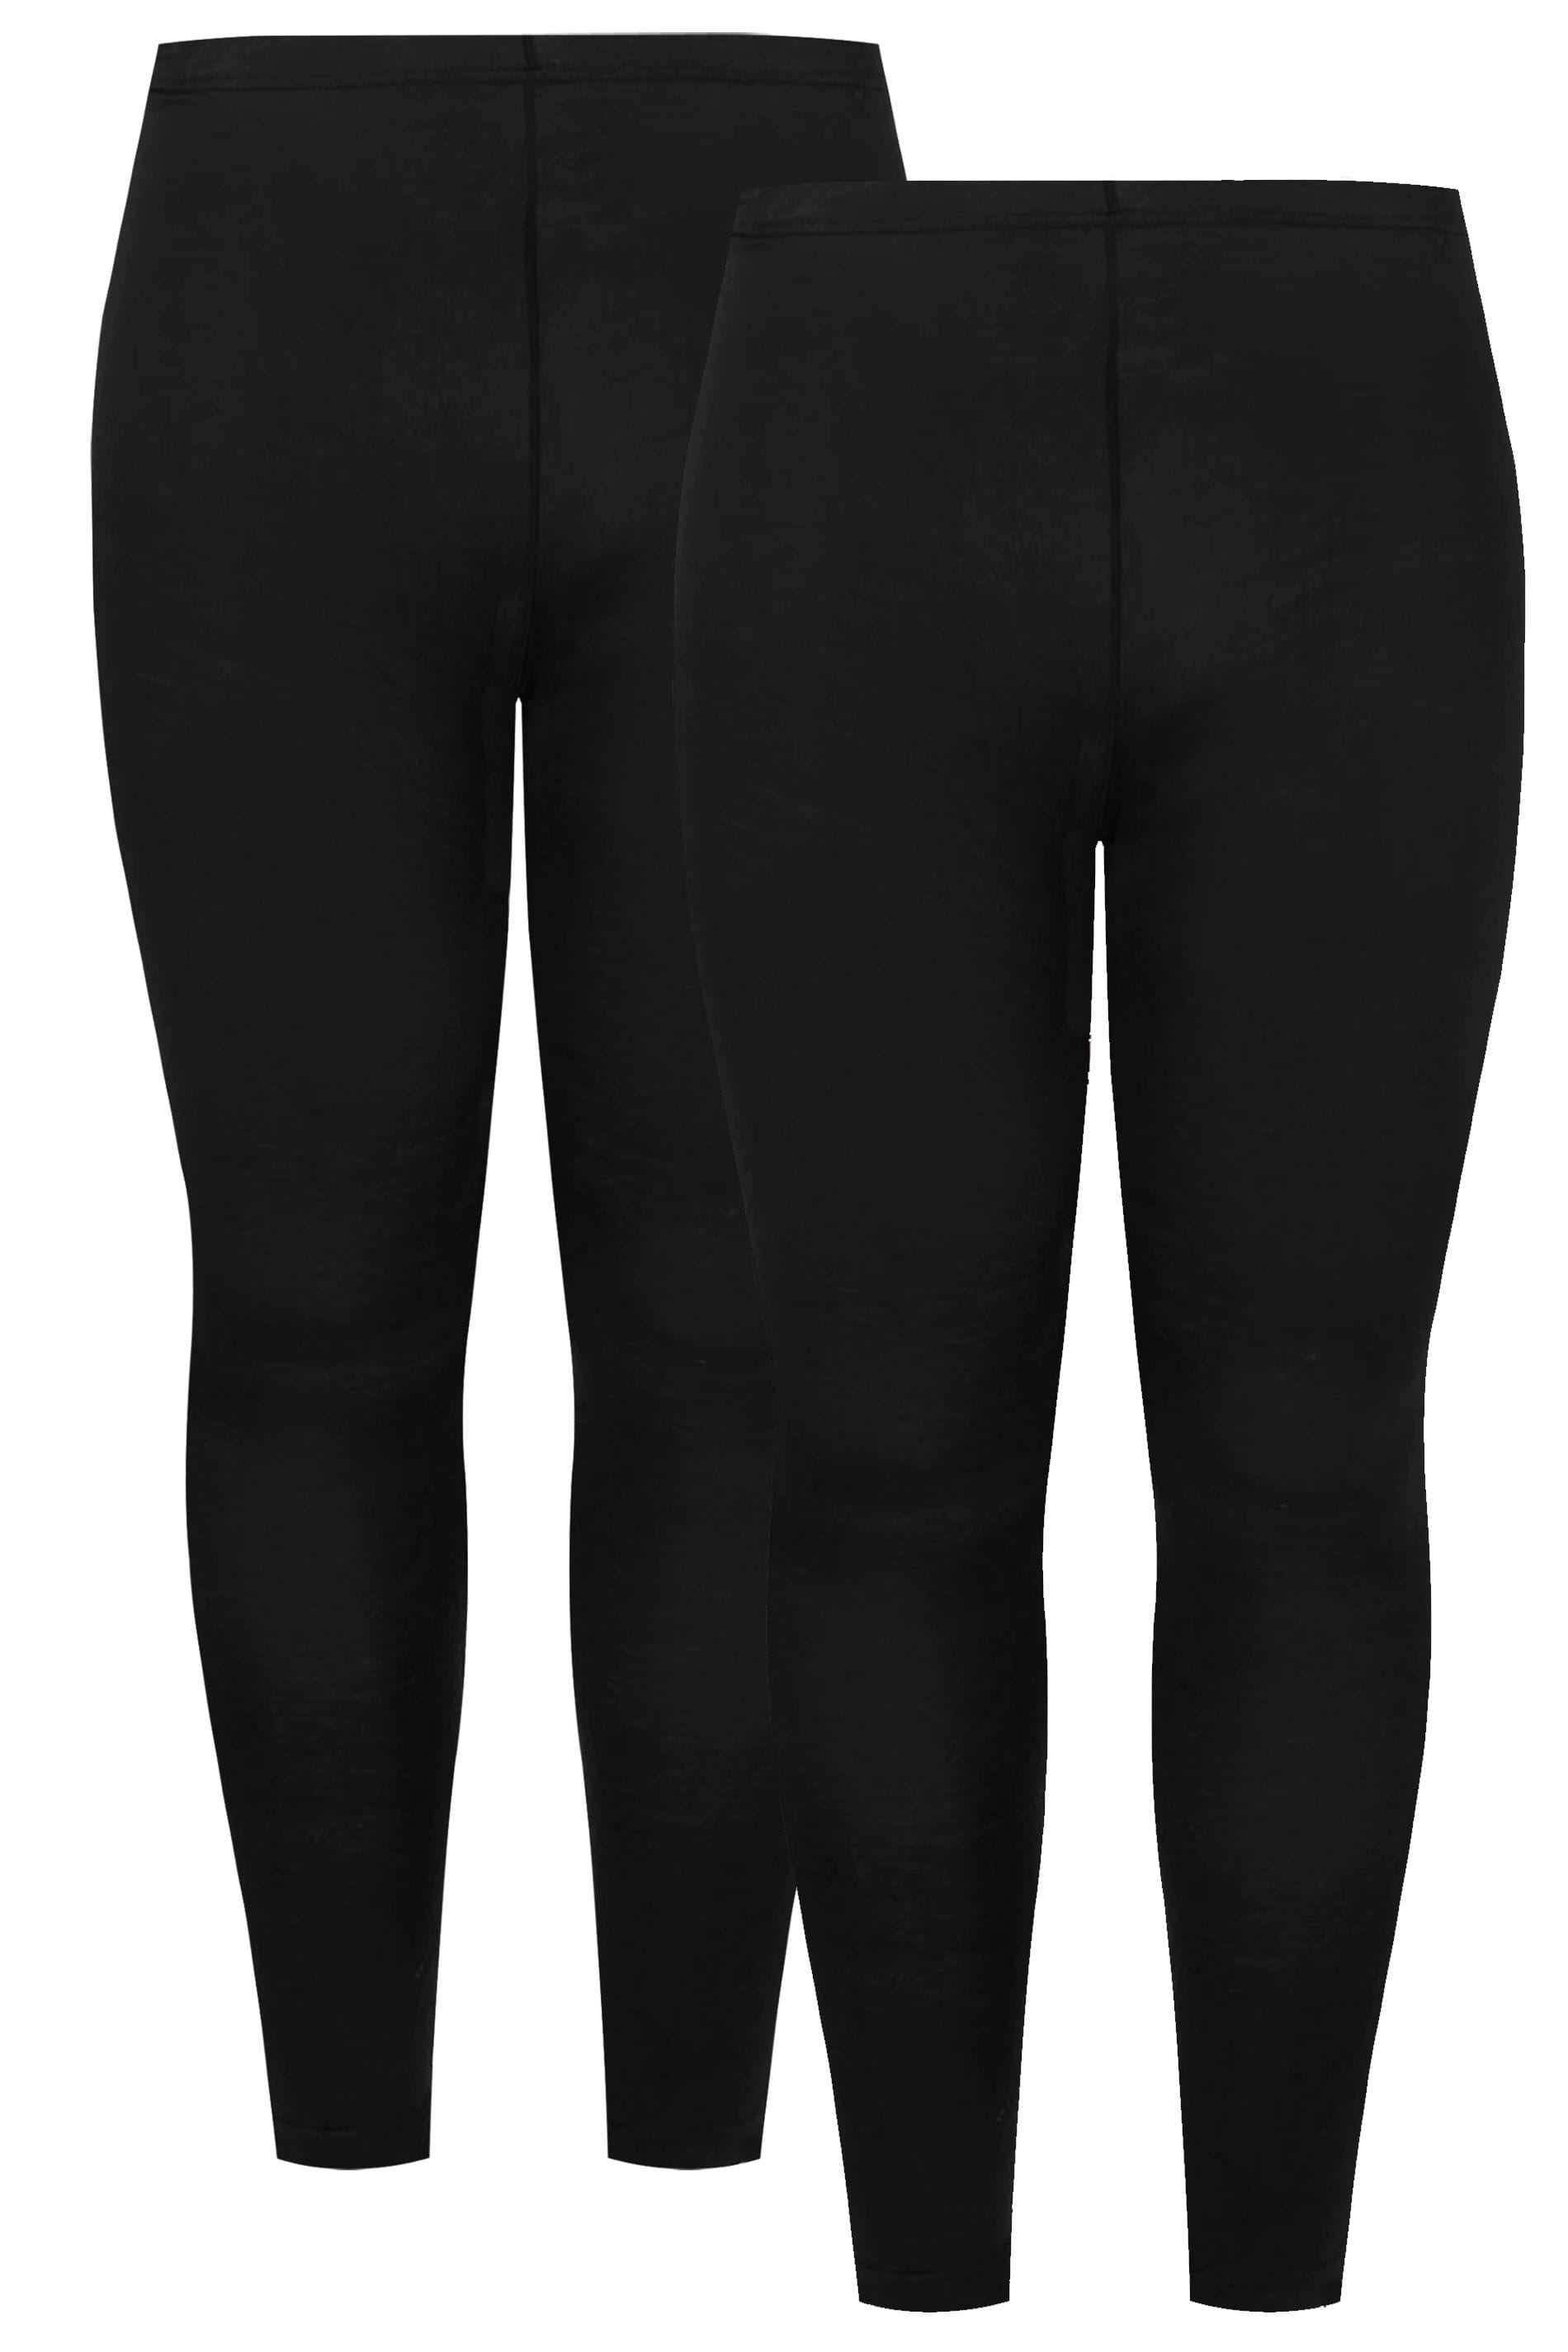 Select Fashion Black 2 PACK Leggings Cotton with Stretch UK 18